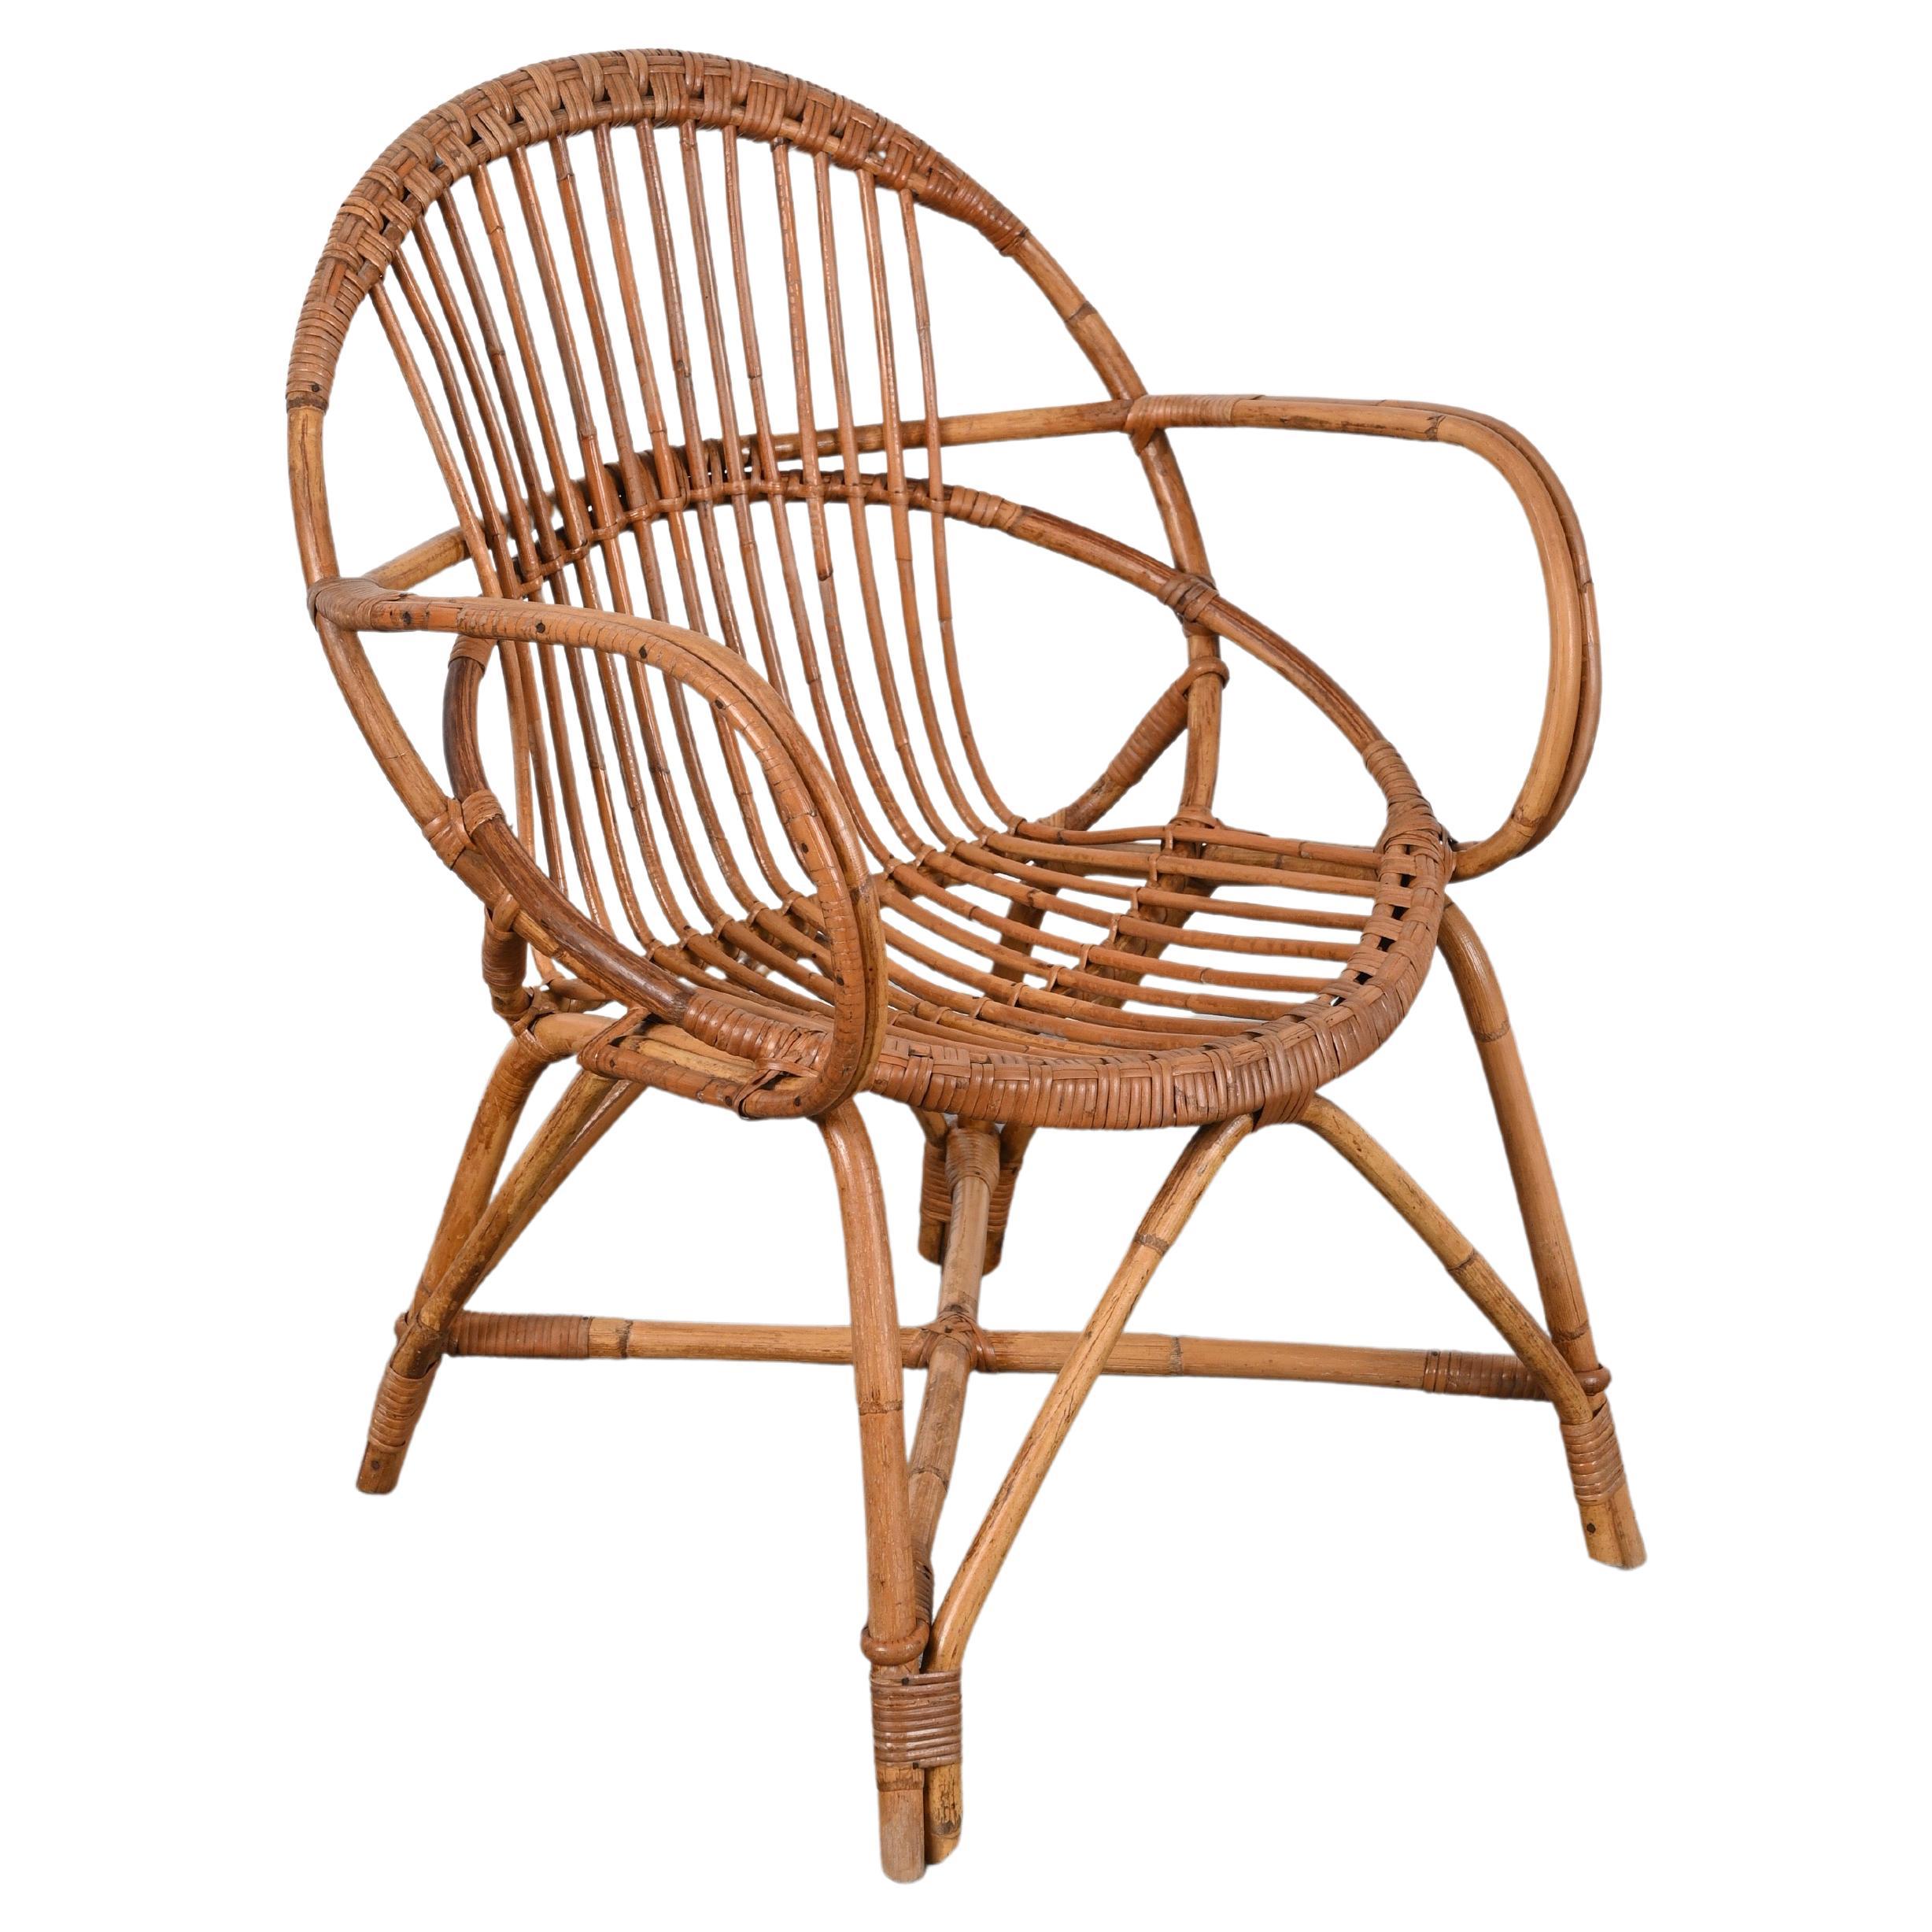 Midcentury Franco Albini Rattan and Bamboo Shell-Shaped Armchair, Italy, 1950s For Sale 10